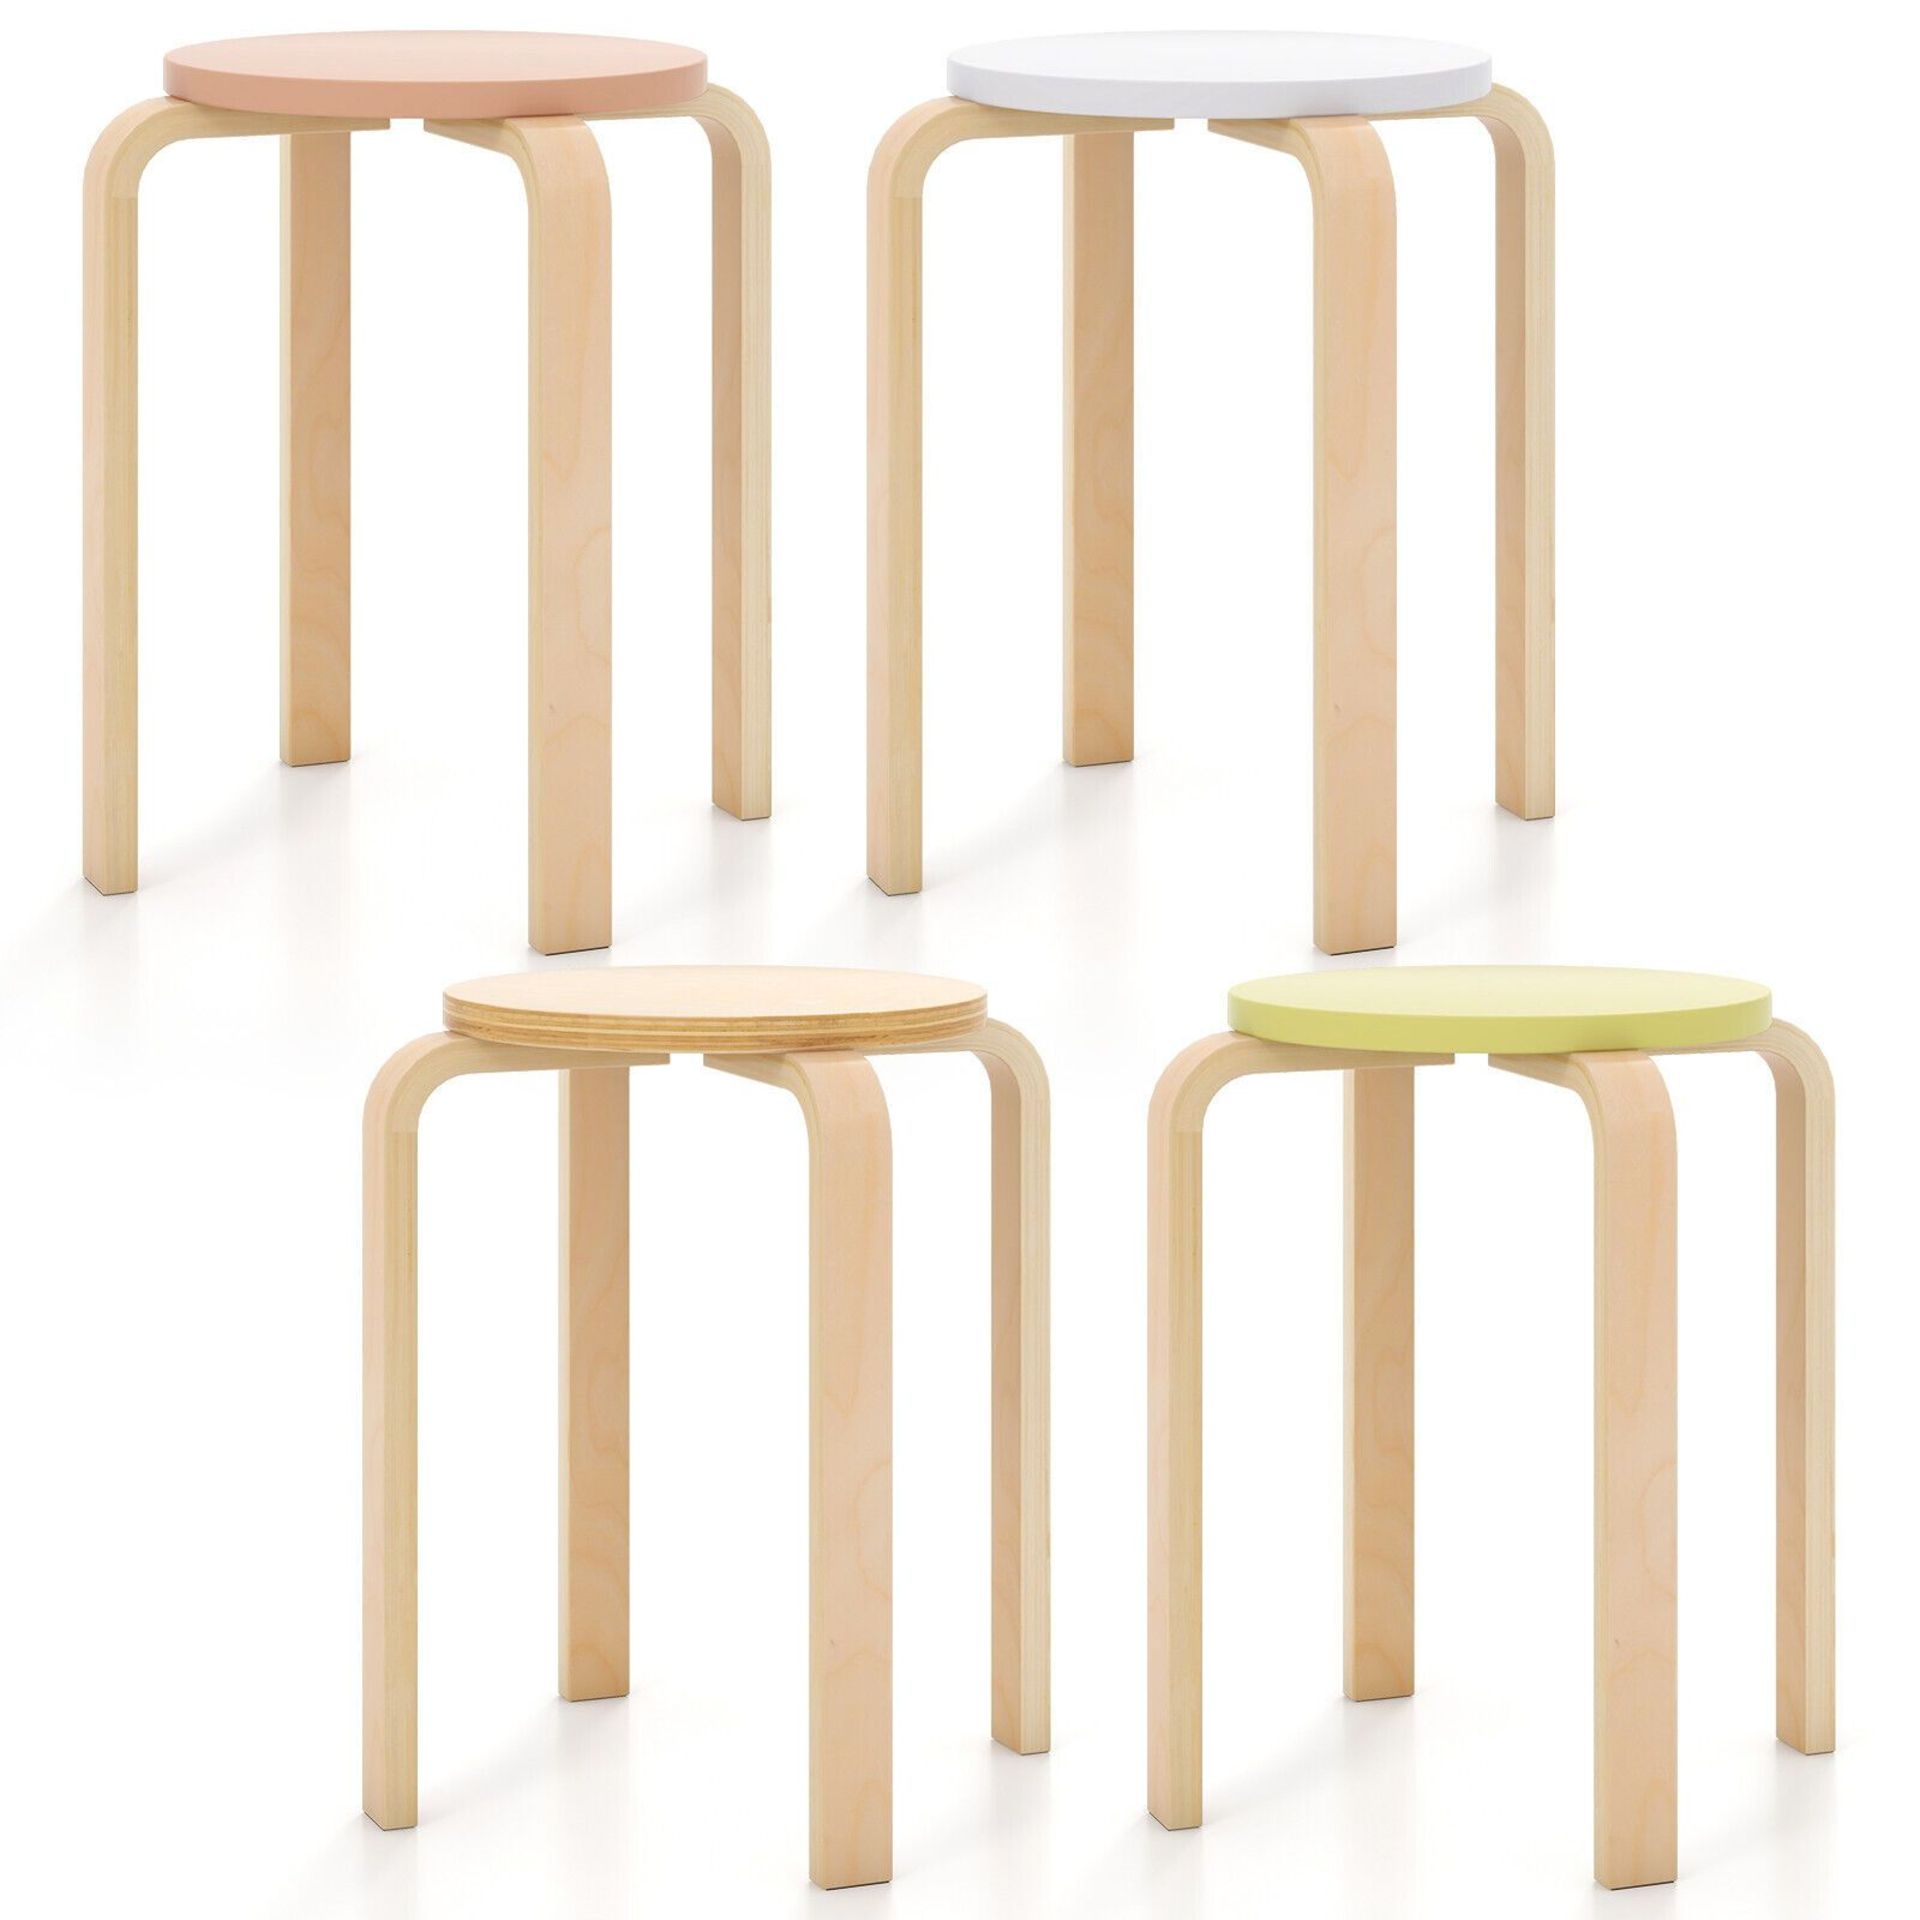 4Pcs Bentwood Stacking Stools Backless Round Stools Colorful Stackable Chairs. - ER53.